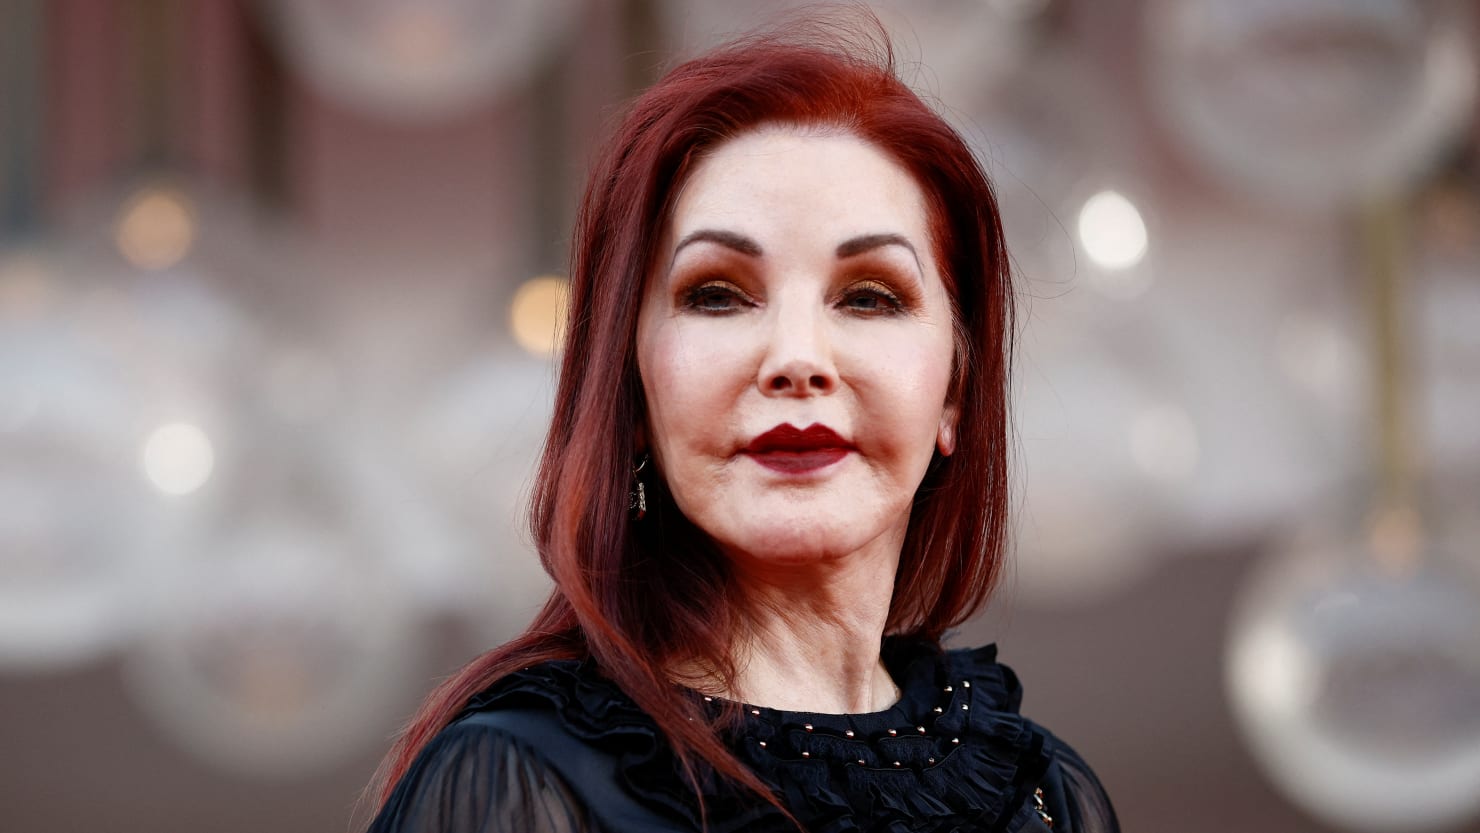 Priscilla Presley: Not a Day Goes By When I Don’t Think About Elvis